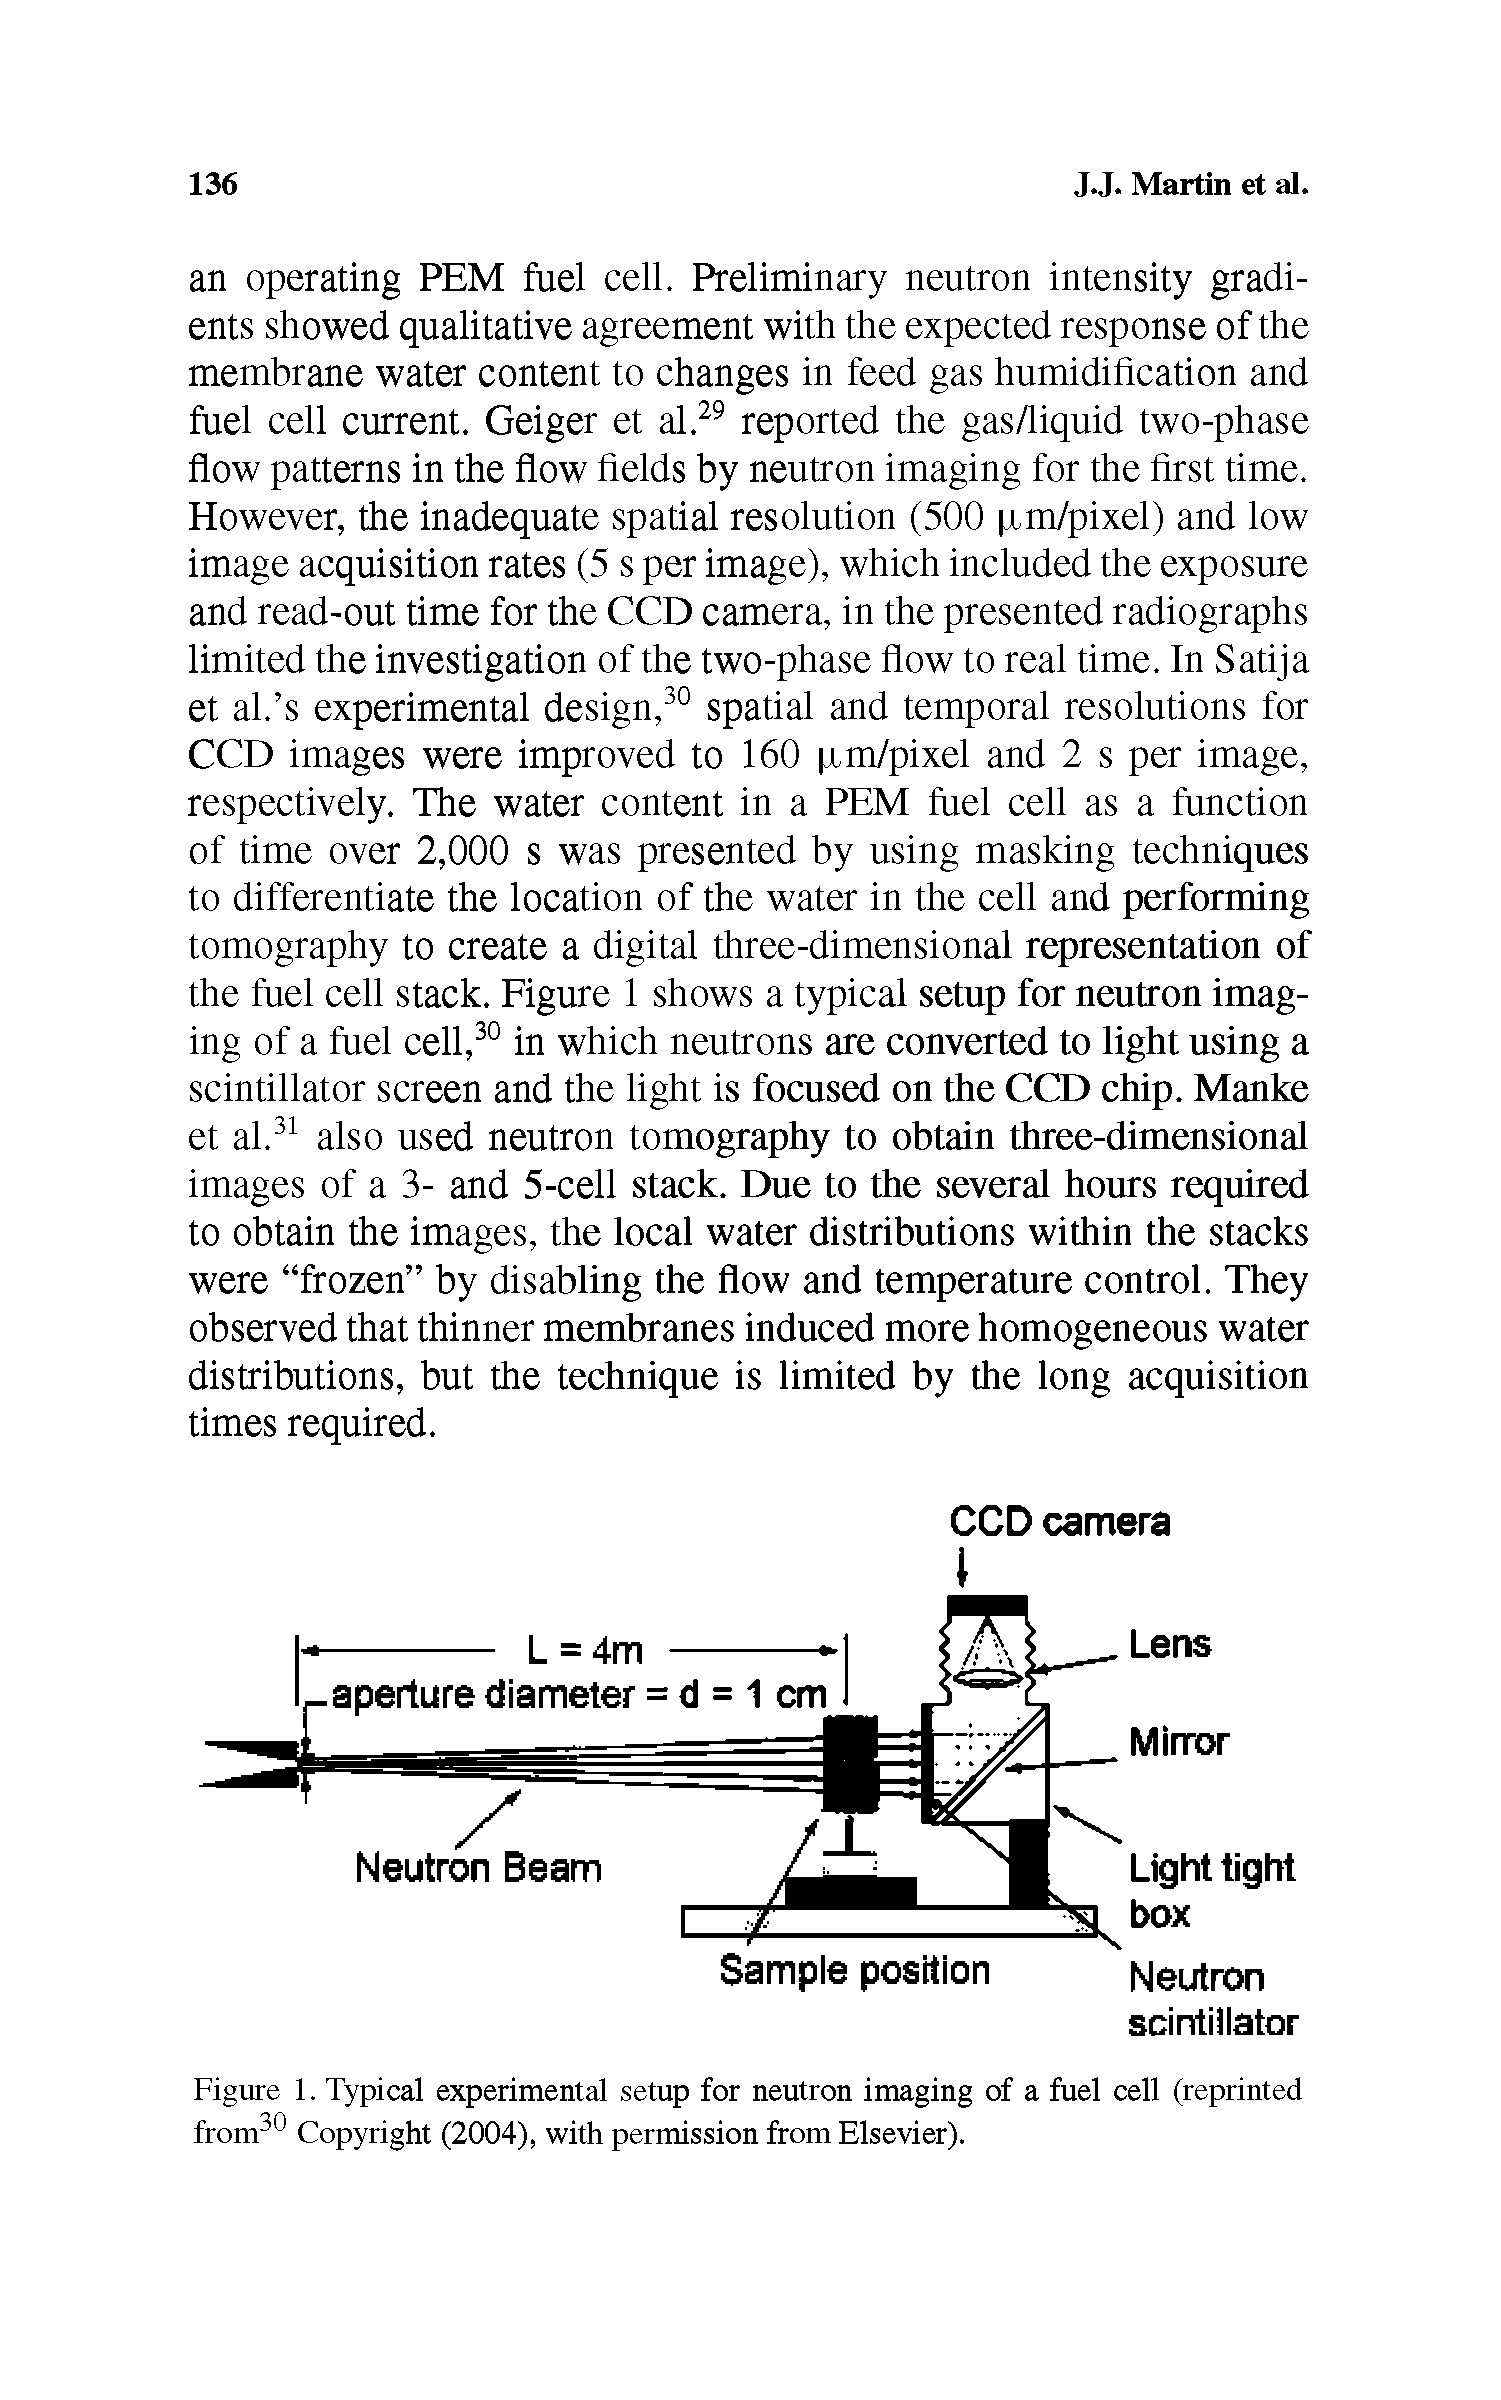 Figure 1. Typical experimental setup for neutron imaging of a fuel cell (reprinted from30 Copyright (2004), with permission from Elsevier).